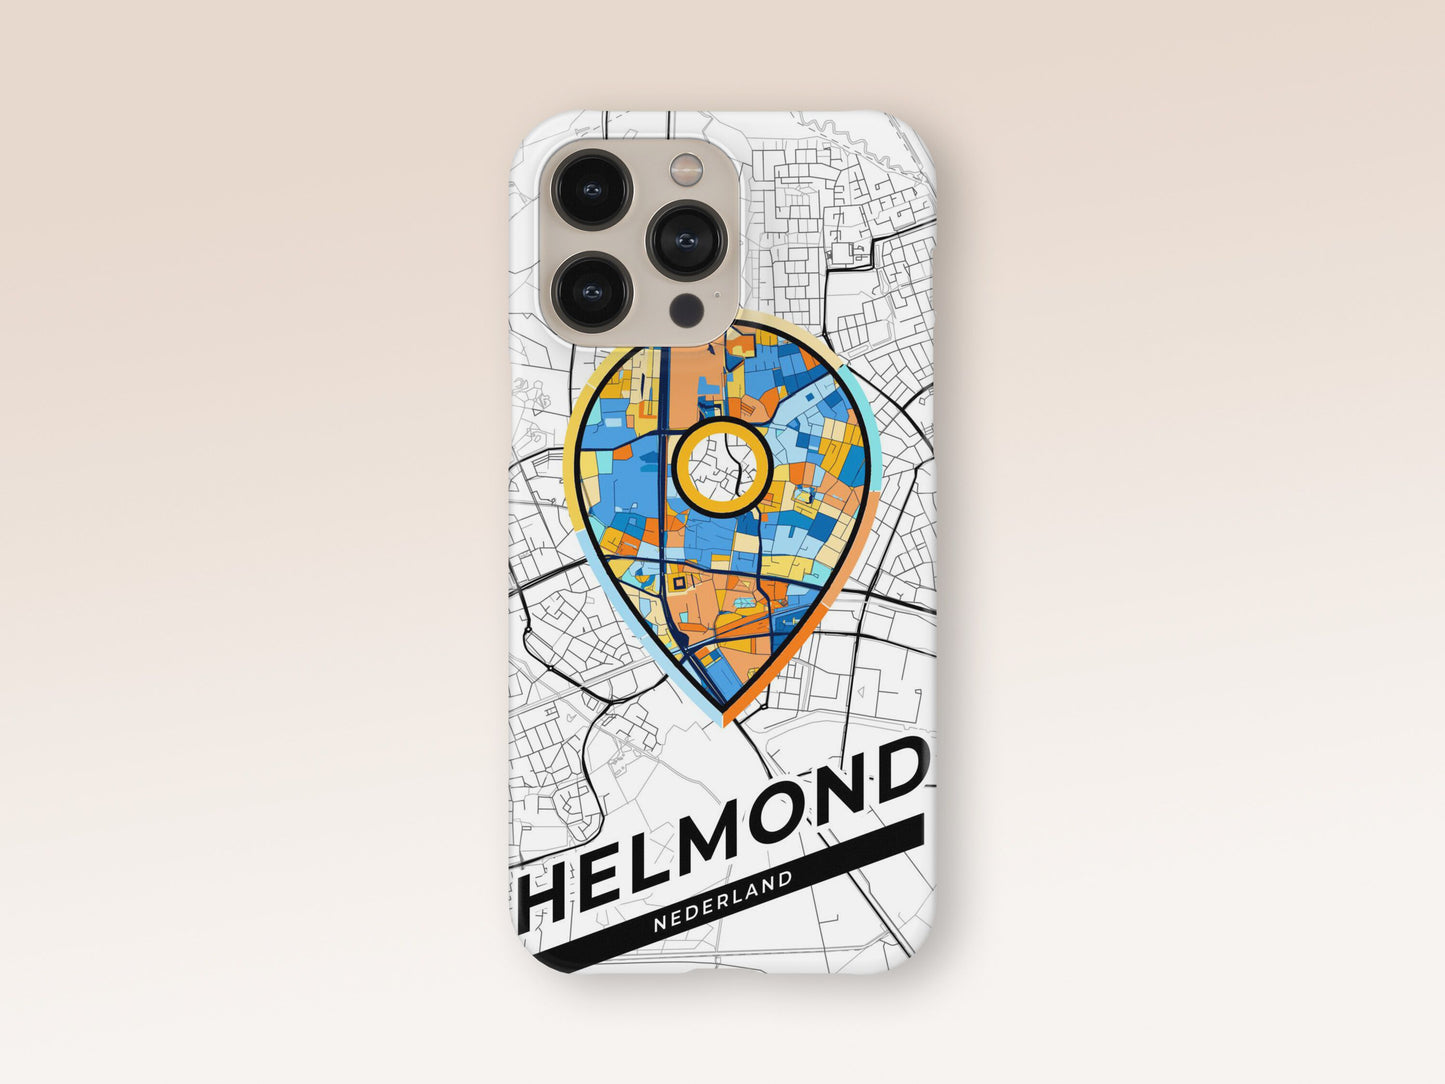 Helmond Netherlands slim phone case with colorful icon. Birthday, wedding or housewarming gift. Couple match cases. 1